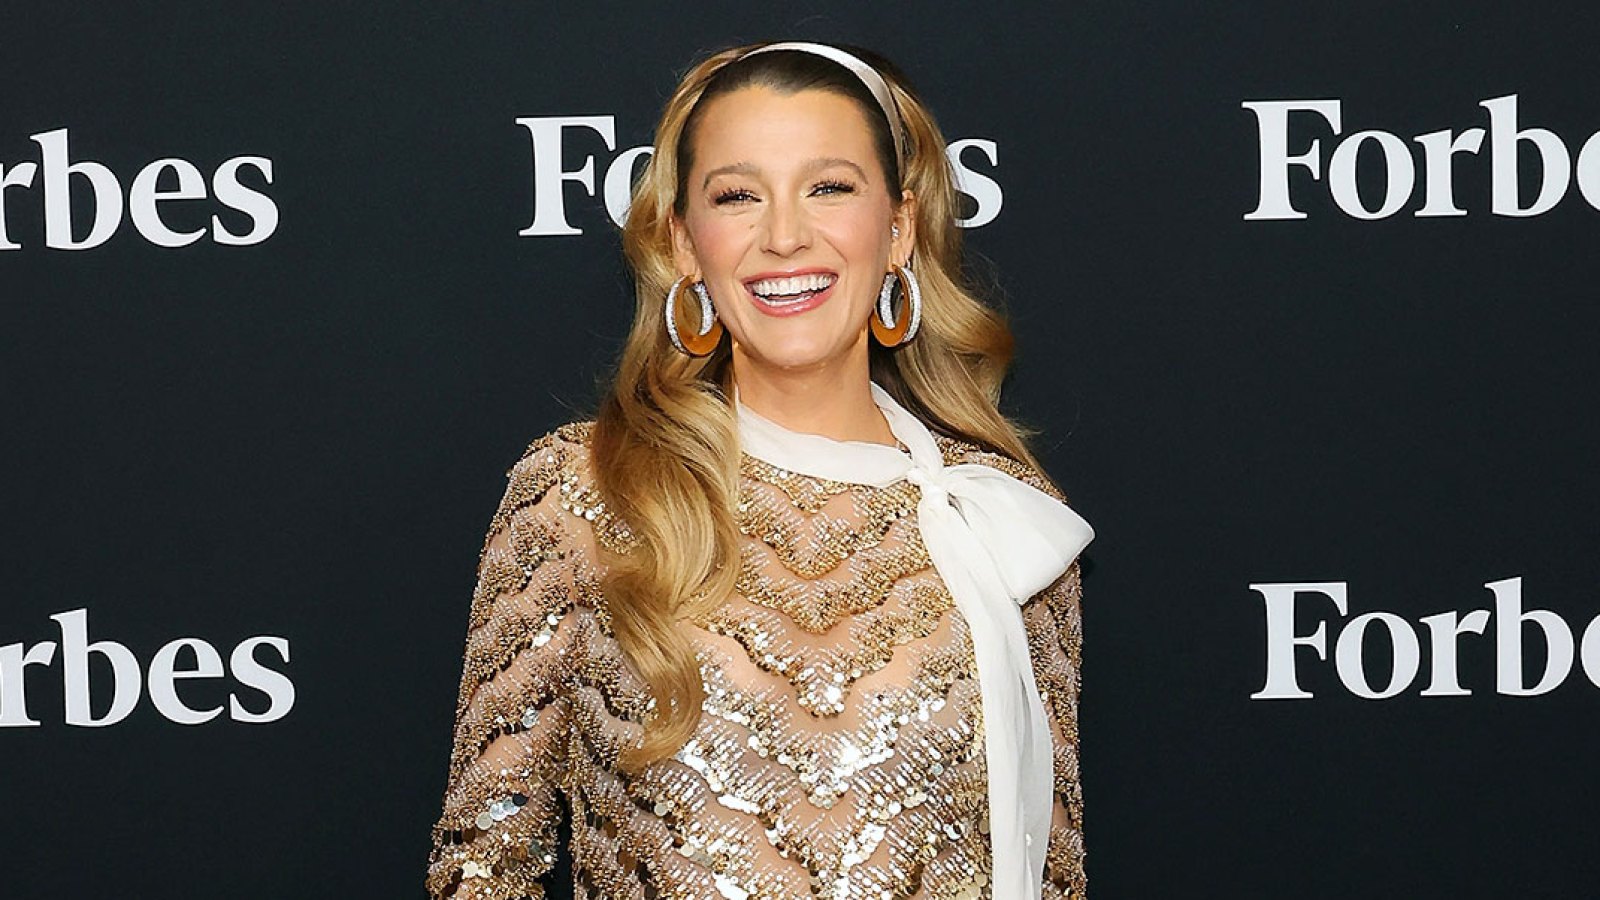 Blake Lively Bakes in Chanel Louboutins